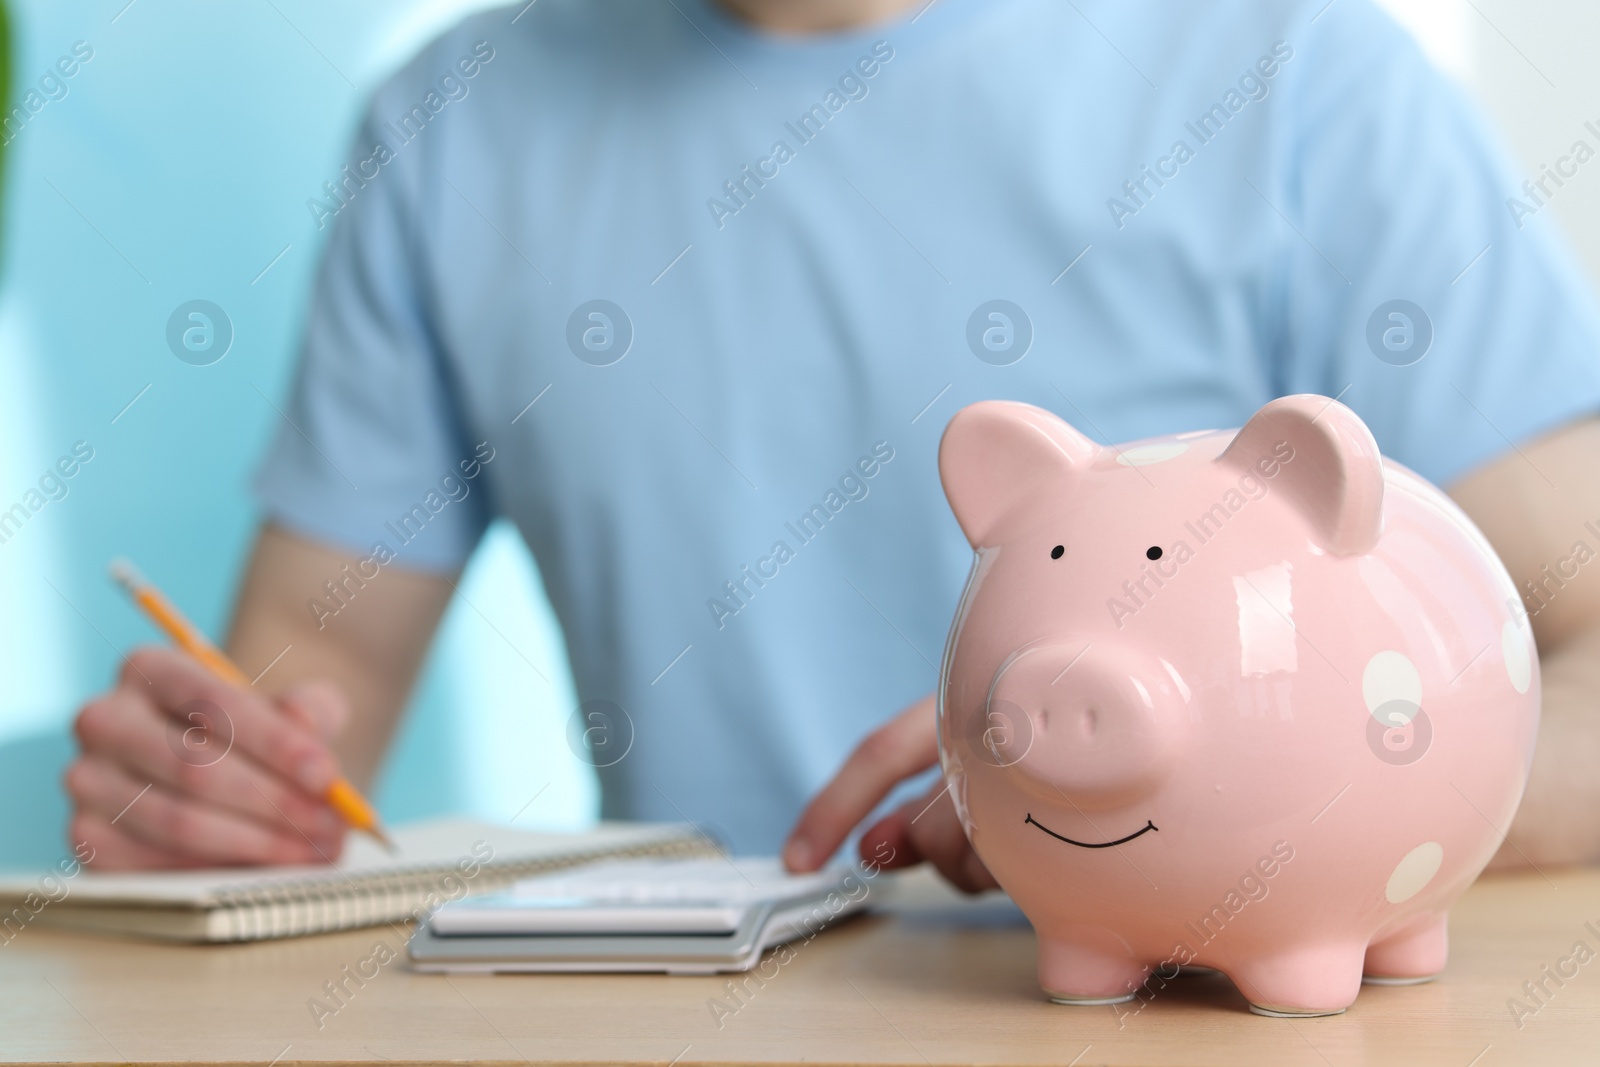 Photo of Financial savings. Man writing down notes at wooden table, focus on piggy bank